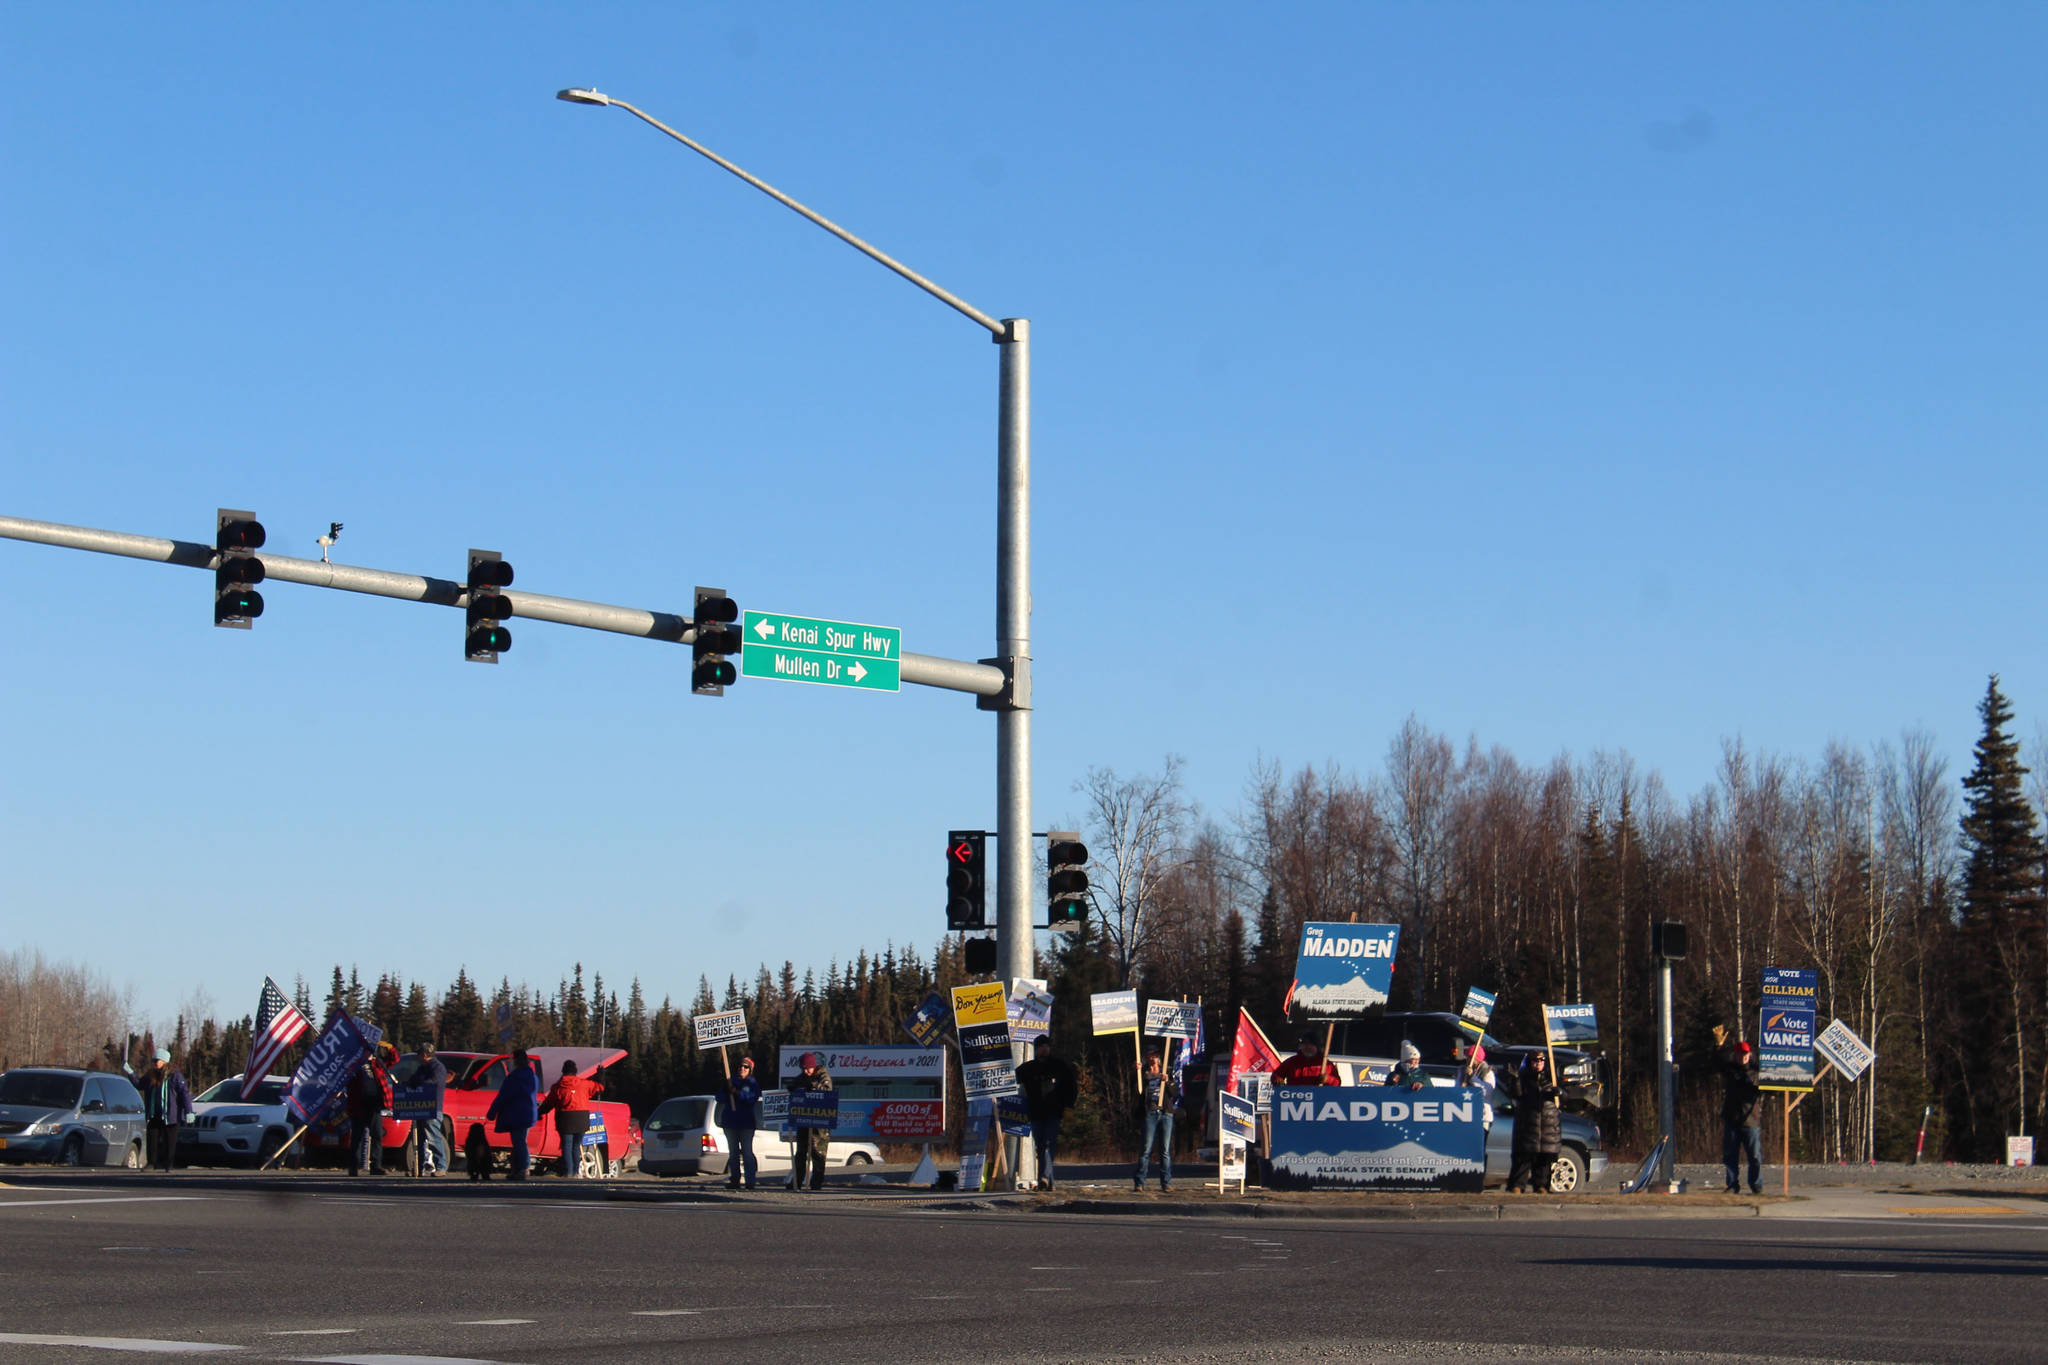 Supporters hold campaign signs at the intersection of Sterling Highway and Kenai Spur Highway on Tuesday, Nov. 3 in Soldotna, Alaska. (Photo by Ashlyn O’Hara/Peninsula Clarion)